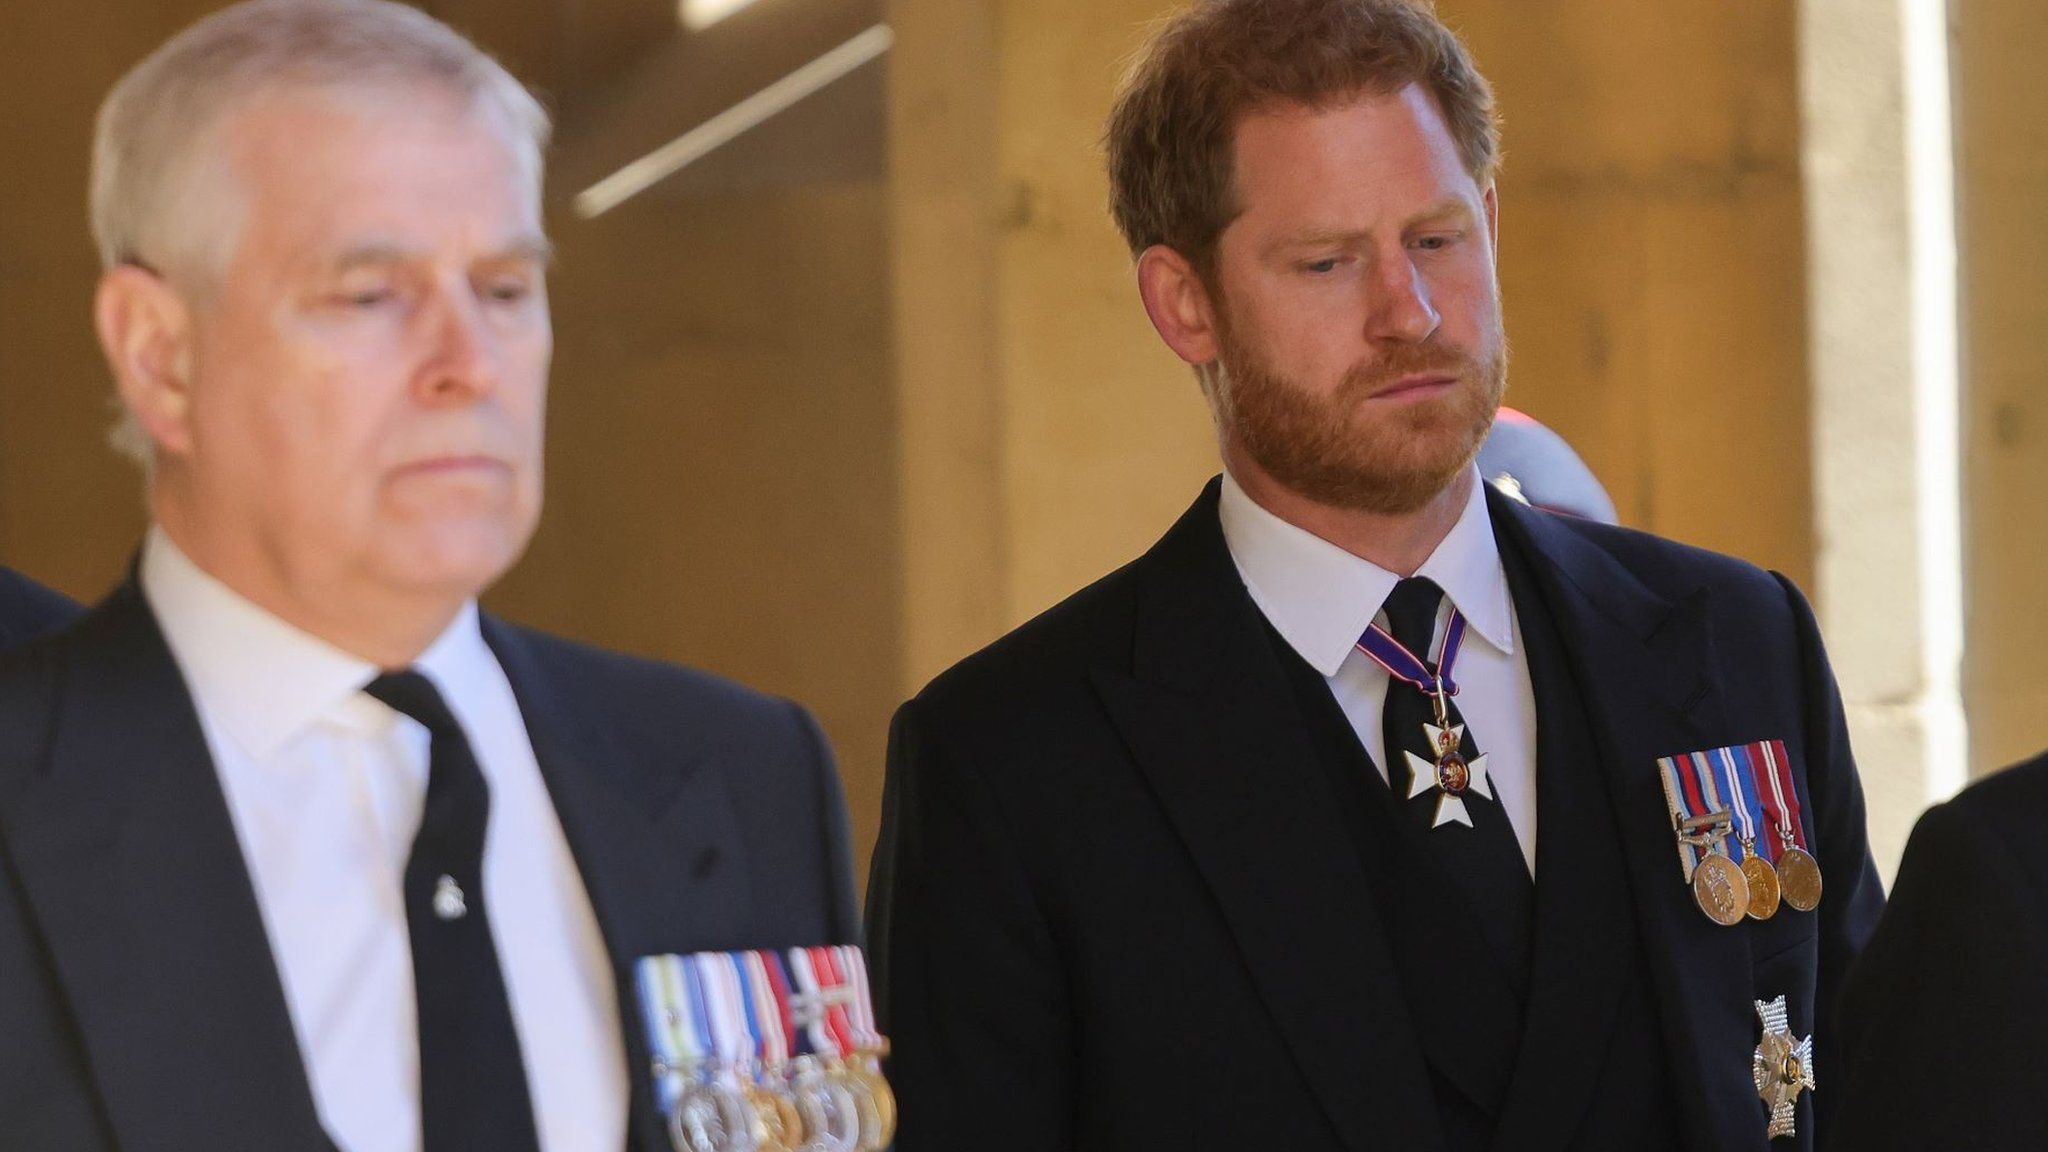 The Duke of York and the Duke of Sussex at the funeral of Prince Philip